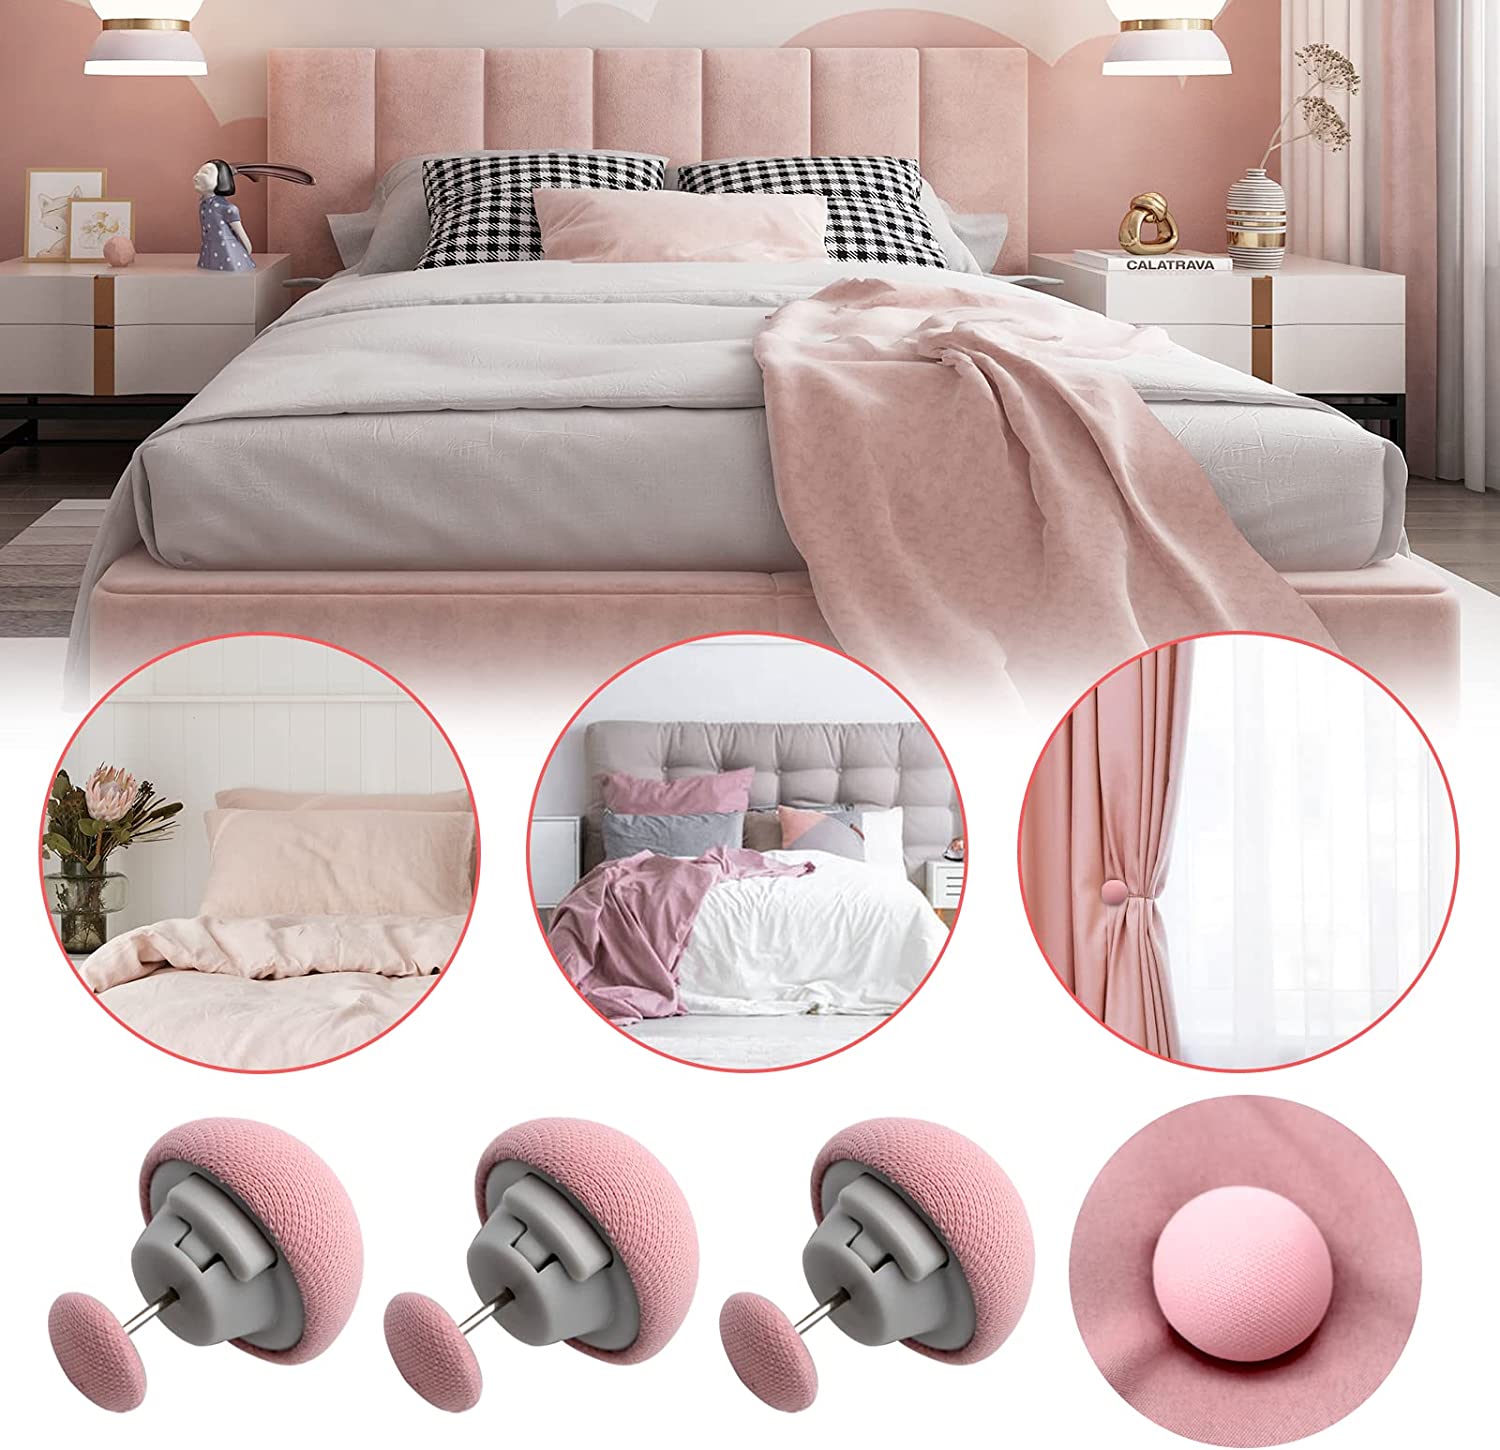 Duvet Clips, Duvet Pin Fasteners 16 Set with Plastic Nails, Duvet Cover  Pins for Quilt, Cushions, Curtains for Preventing Comforters from Shifting